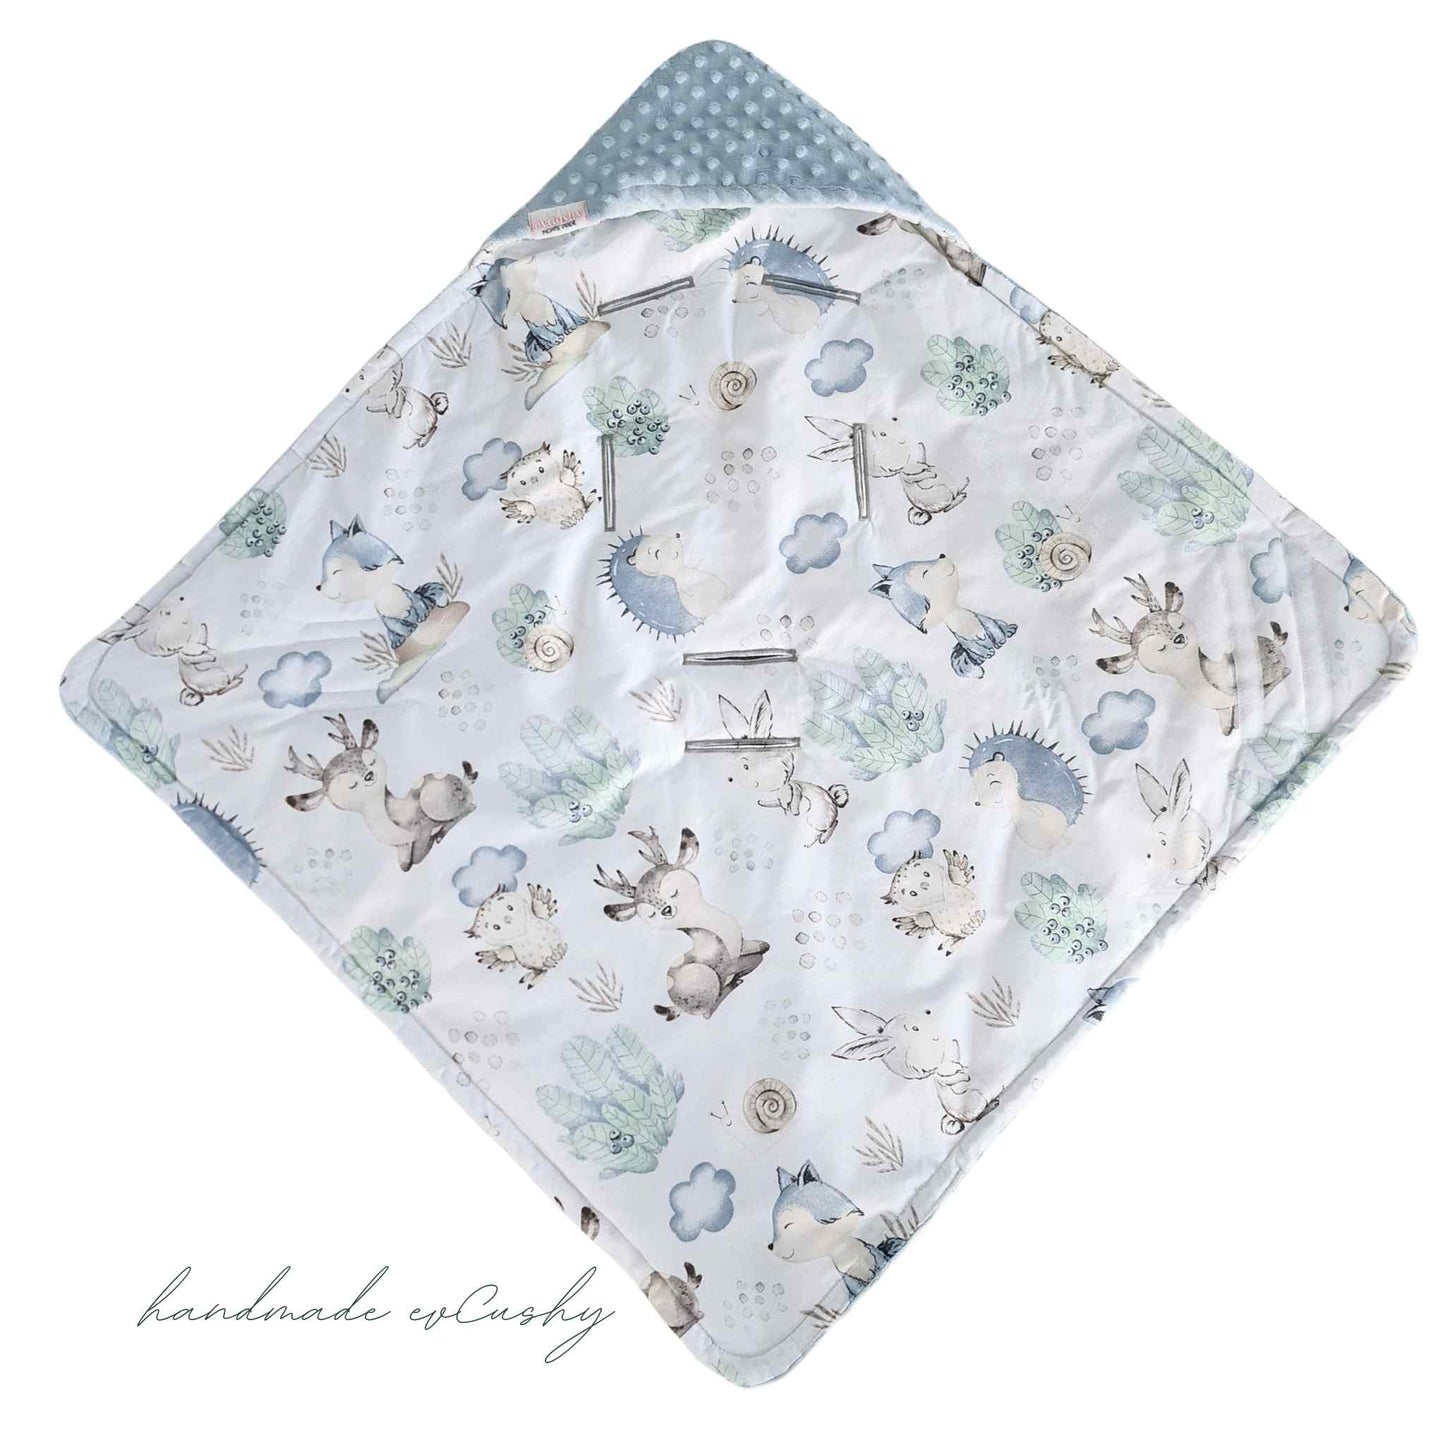 Car Seat Blanket - Deers, Foxes, Owls, Hedgehogs, and Snails in Cozy Blue Plush